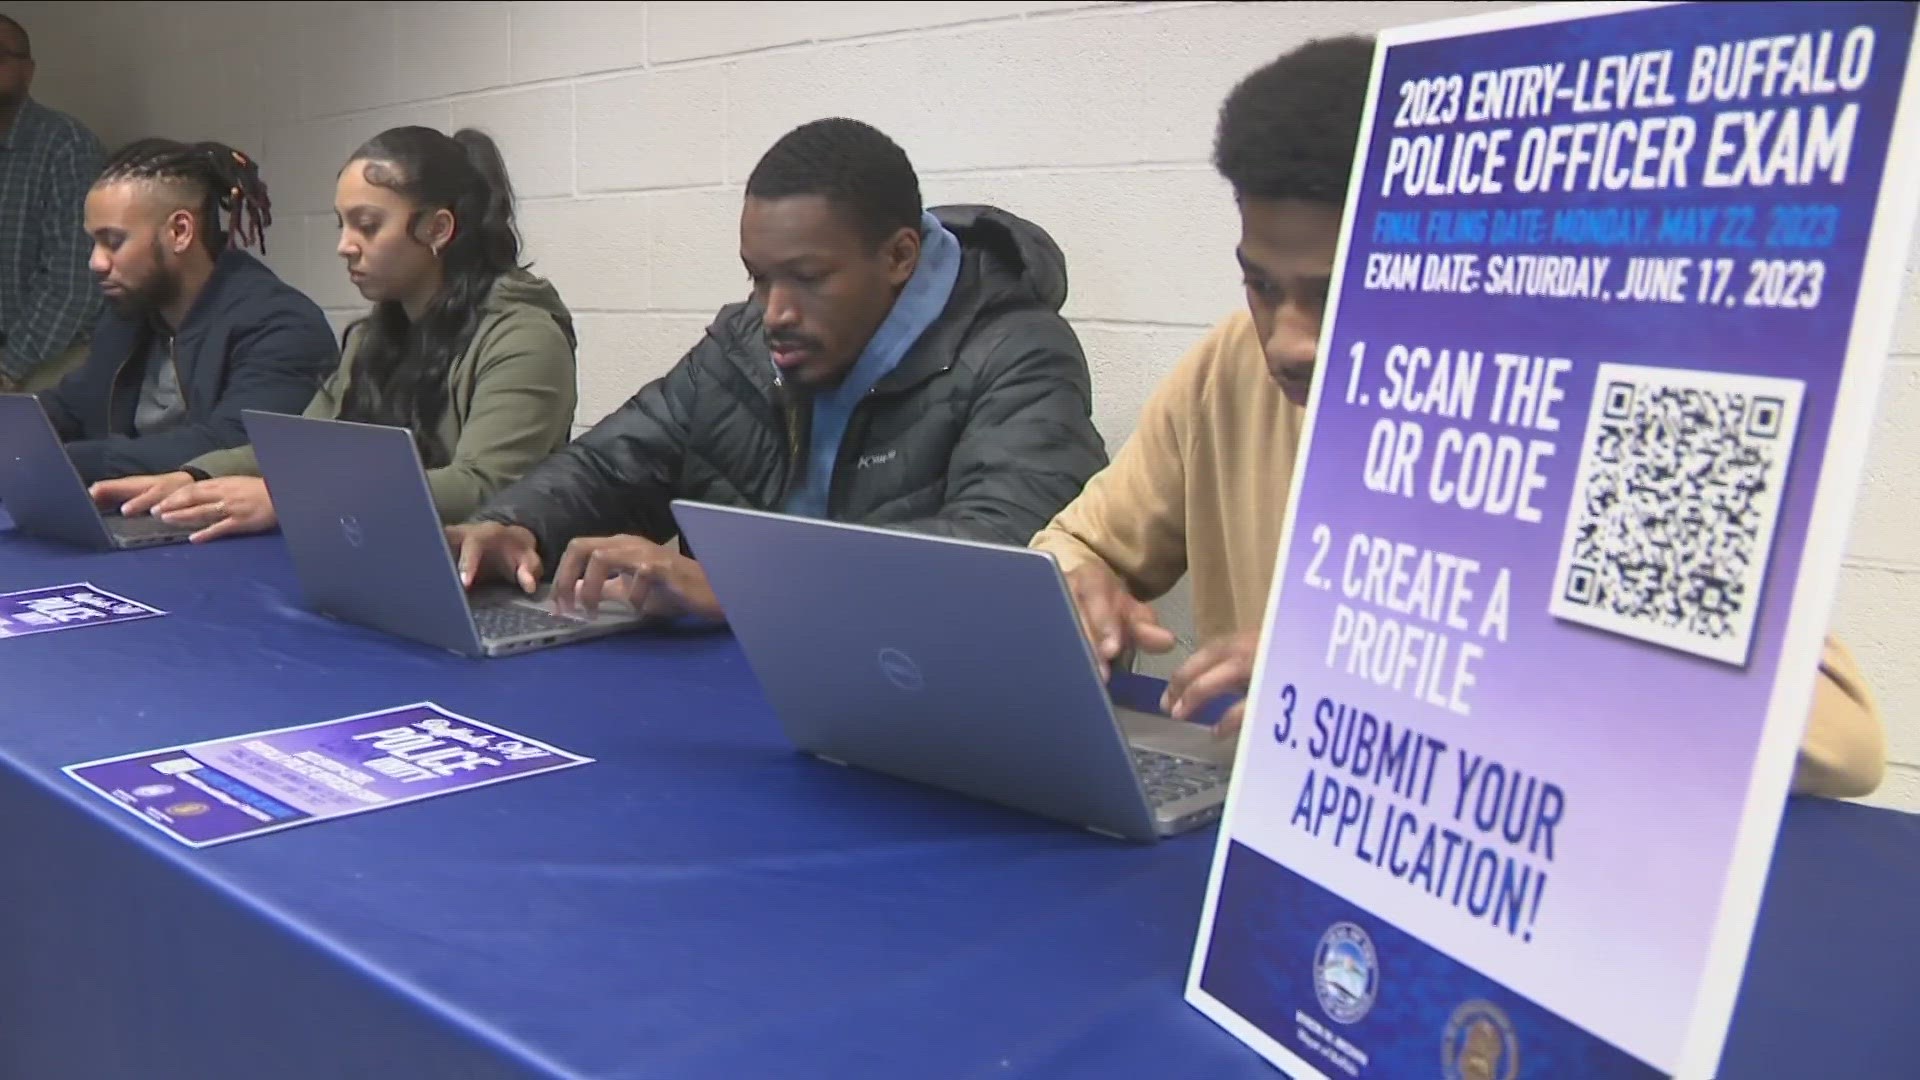 Buffalo Police exam deadline quickly approaching